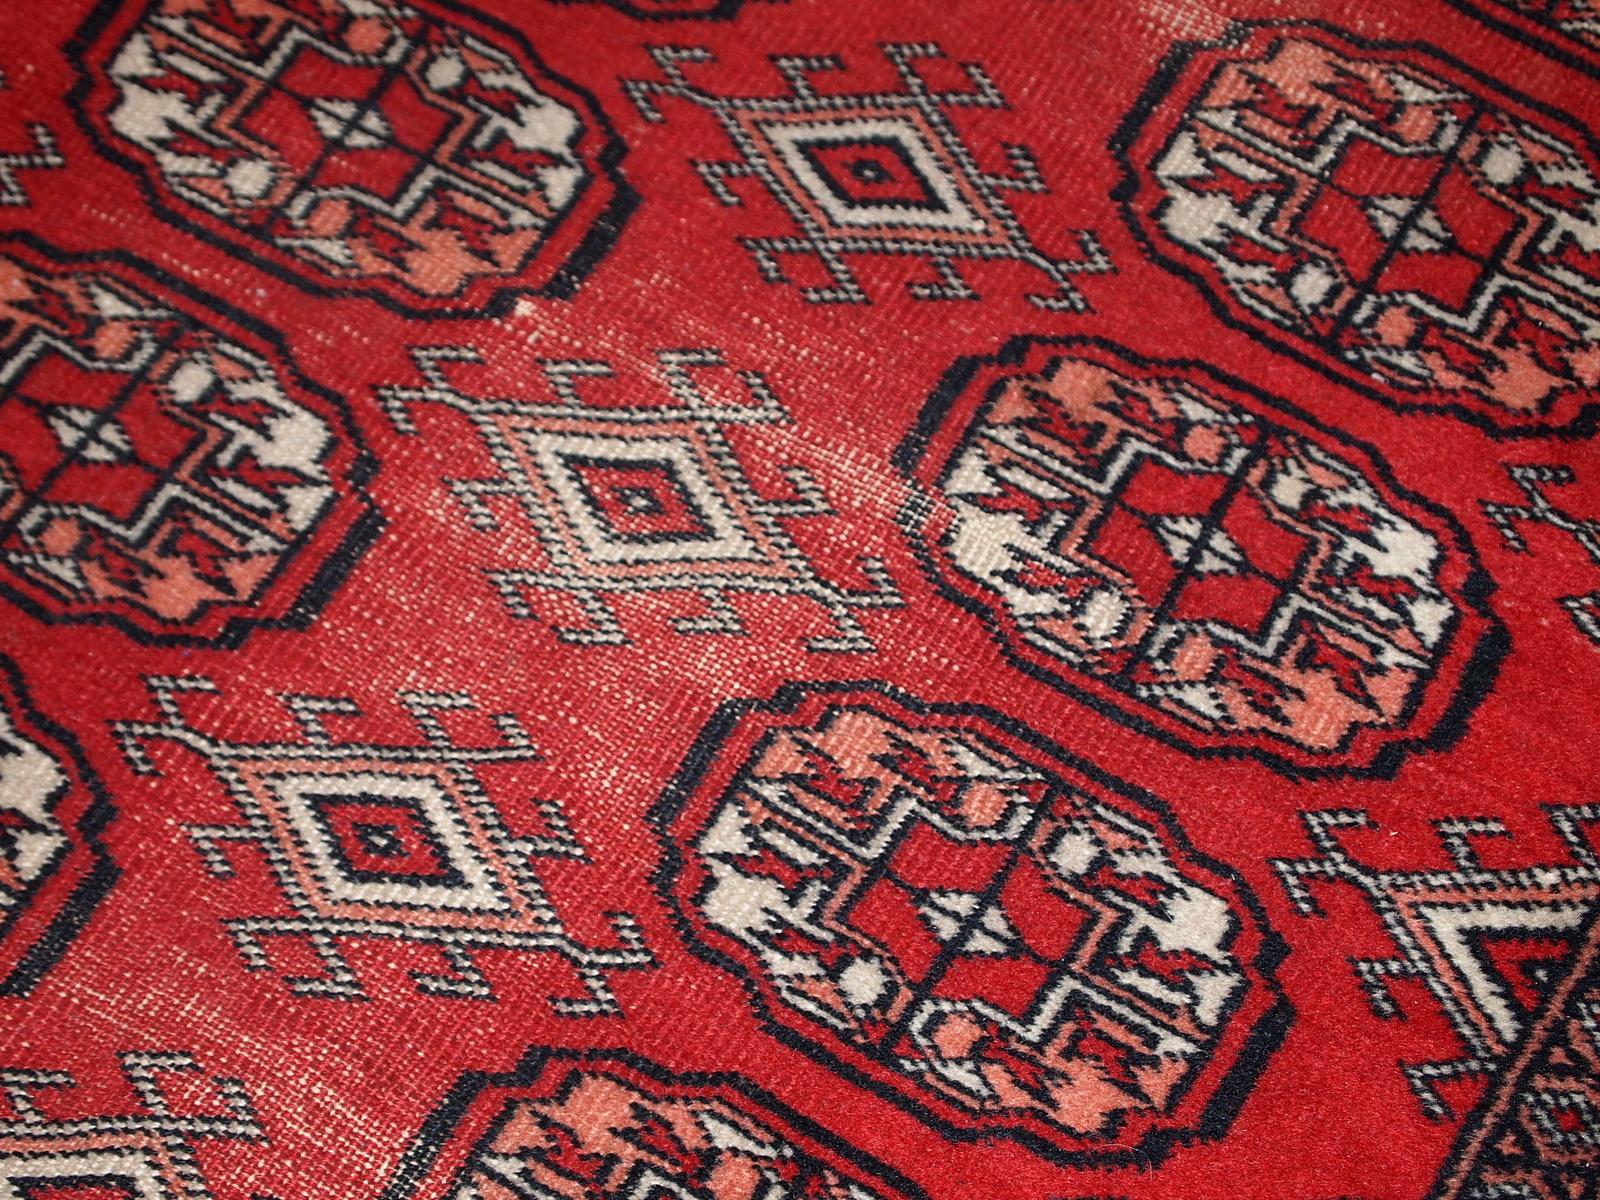 Handmade vintage Uzbek Bukhara runner in original condition, it has some age wear. The rug made in soft wool in the middle of 20th century. 

-condition: original, some signs of age,

-circa: 1960s,

-size: 2.7' x 9' (83cm x